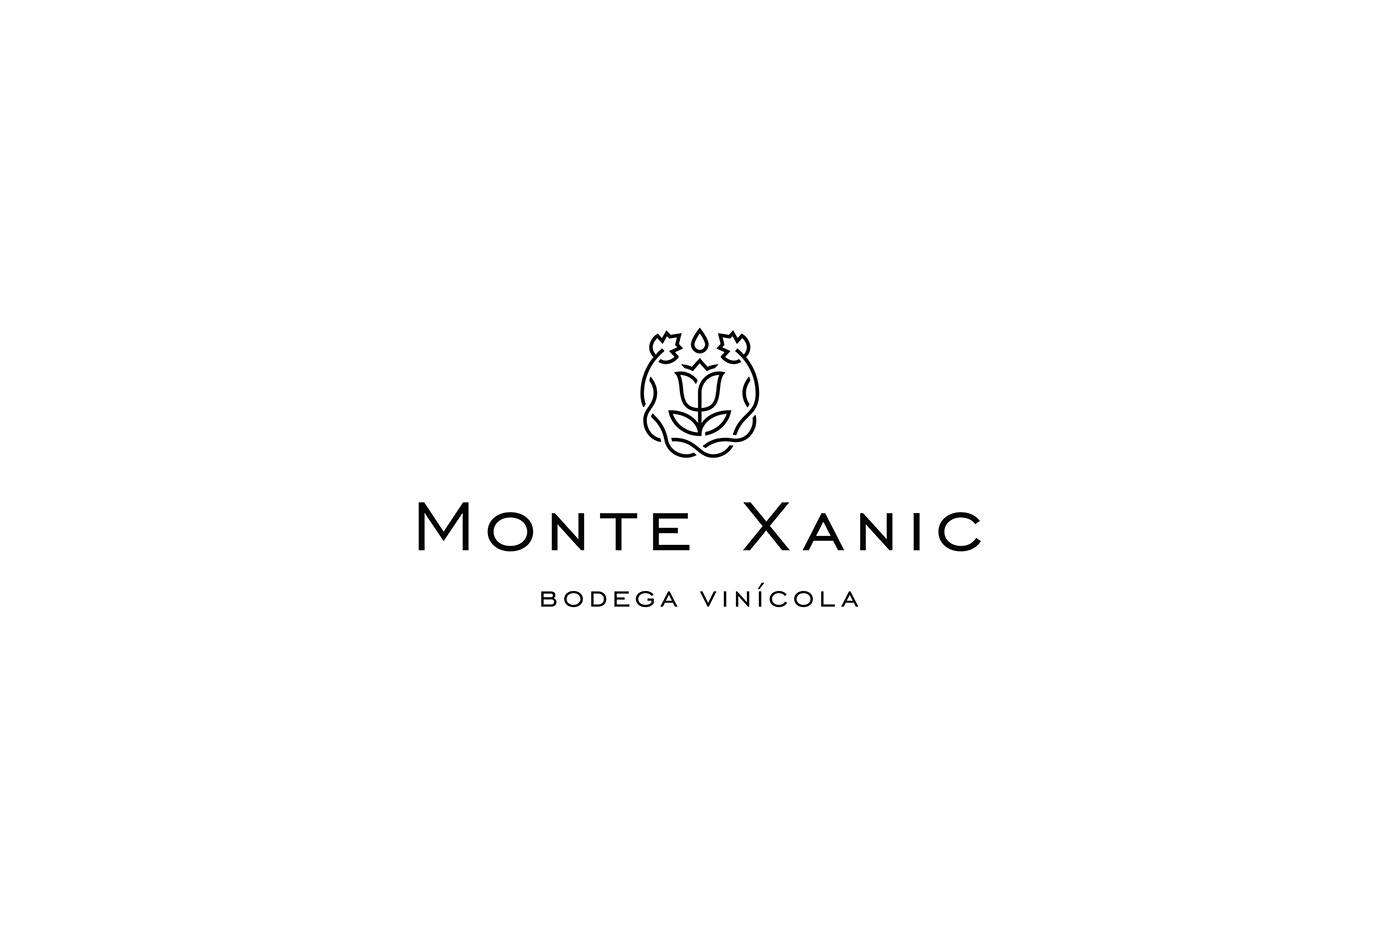 Anagrama mexico wine labels yellow winery wine label monte xanic flower Wine Bottle